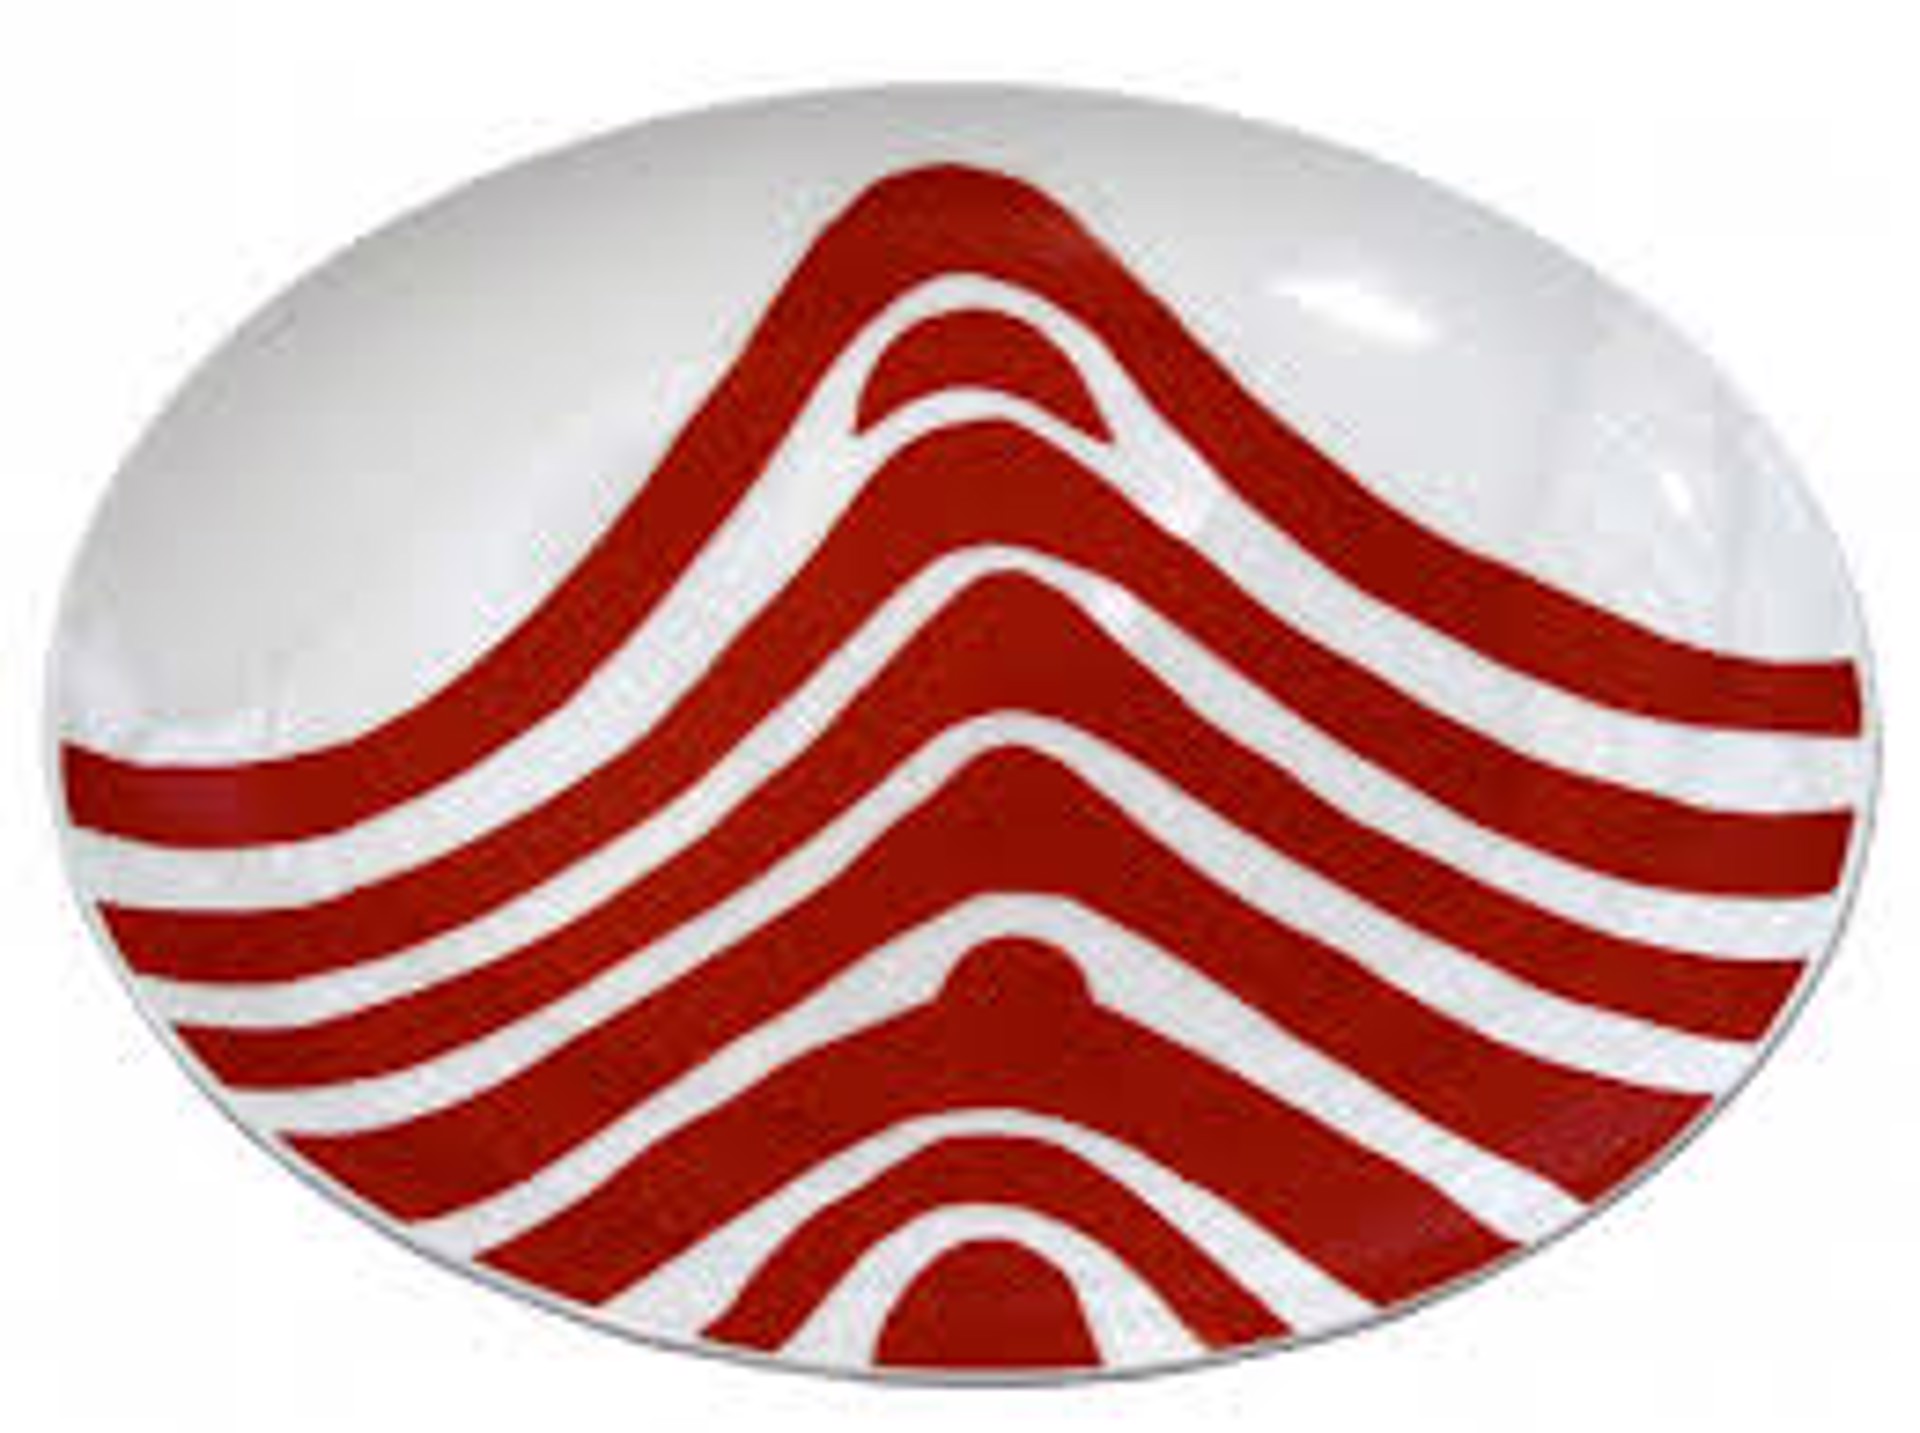 Bone China Plates (red) by Louise Bourgeois